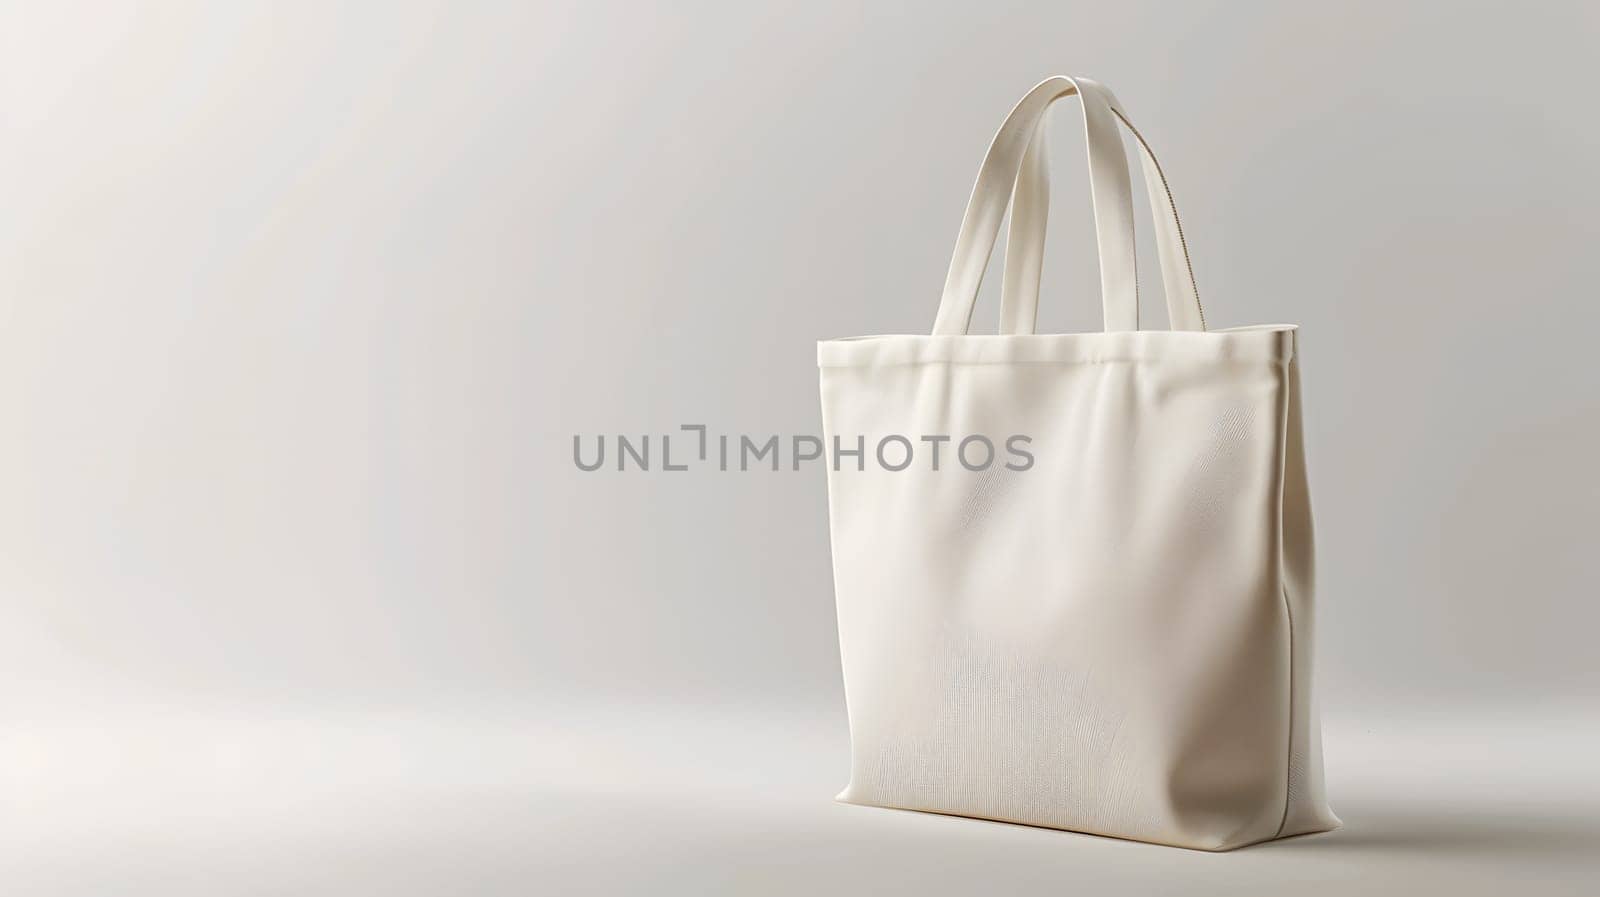 A white canvas tote bag is placed on a white surface, next to a clear plastic bag containing facial tissue. The minimalist design contrasts with the colorful automotivethemed art prints on the walls